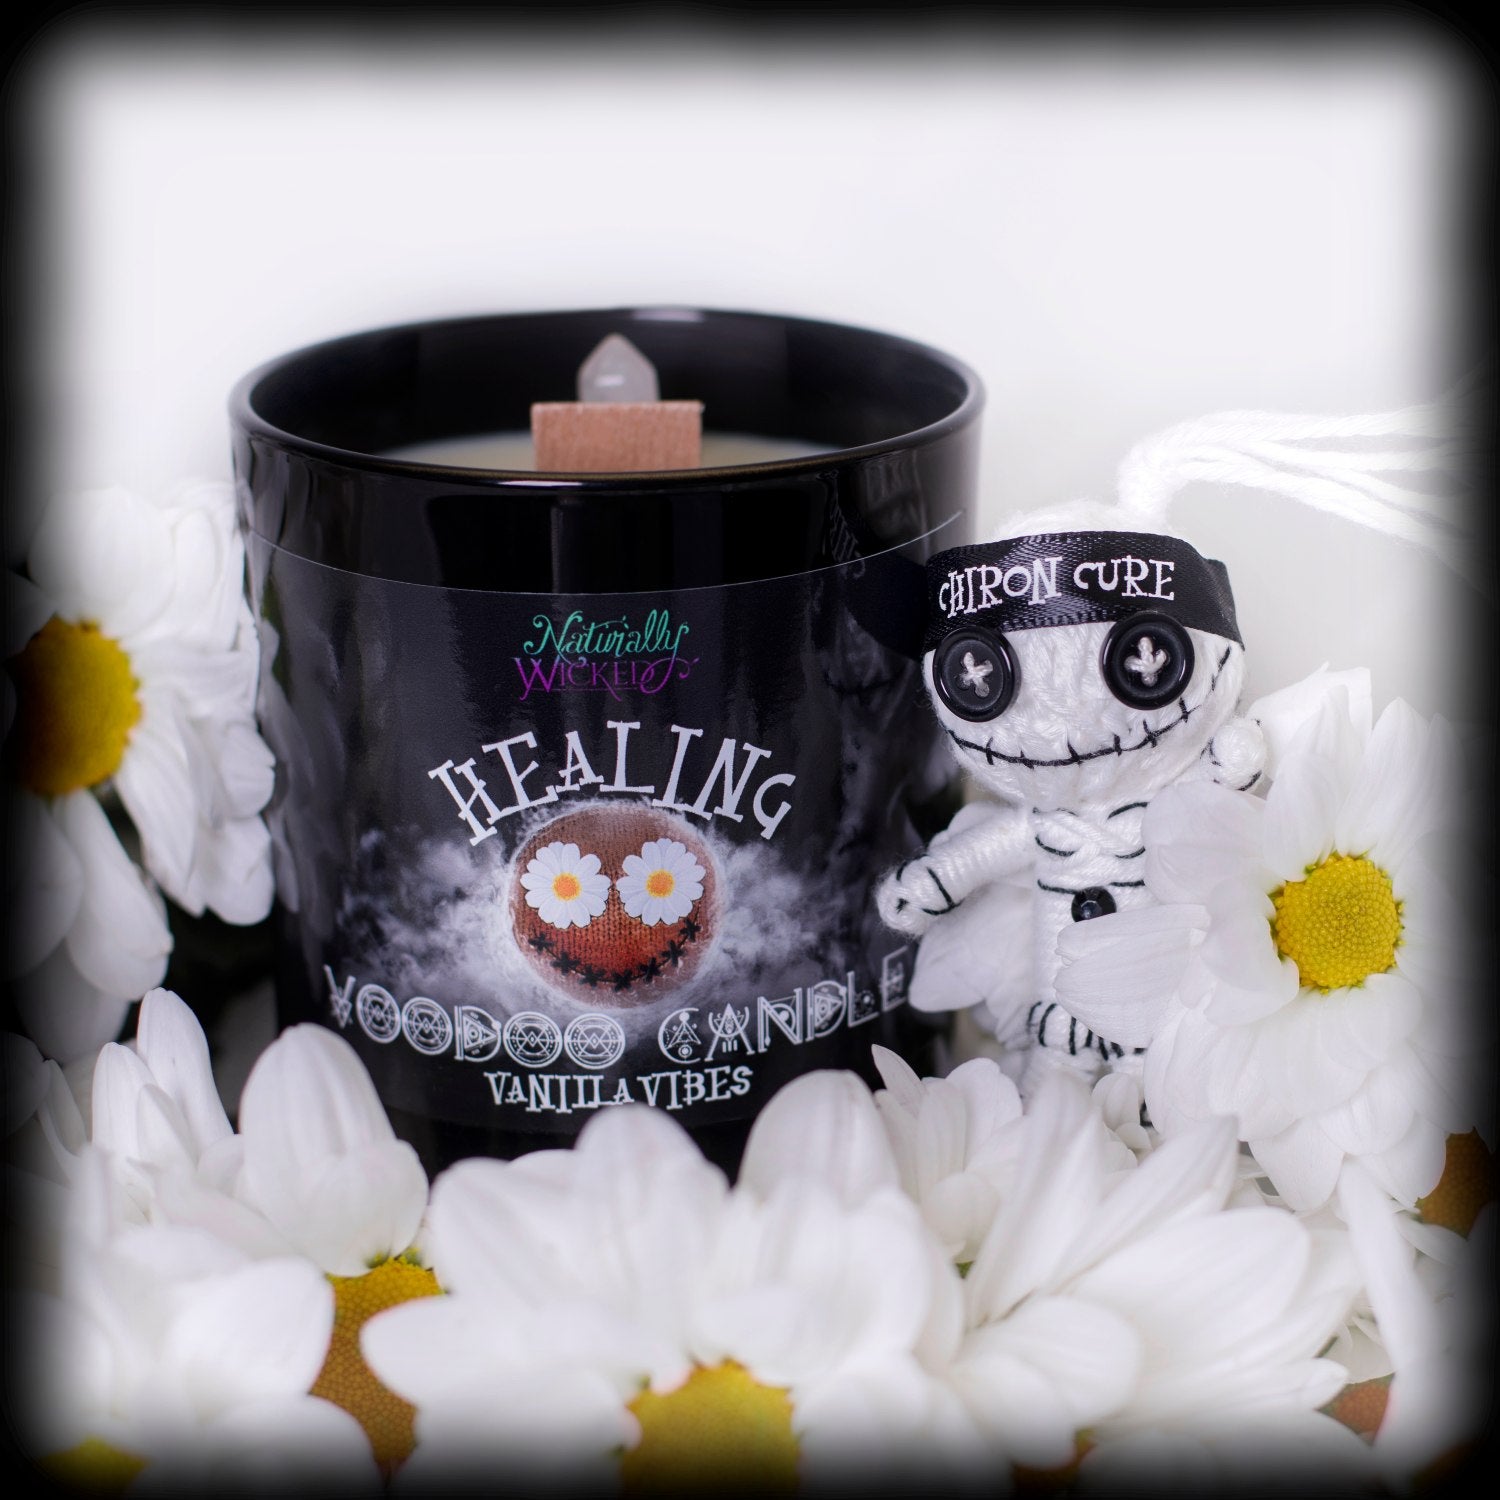 Naturally Wicked Voodoo Healing Spell Candle Entombed With Quartz Crystal Amongst Daisies & Beside Chiron Cure Healing Voodoo Doll